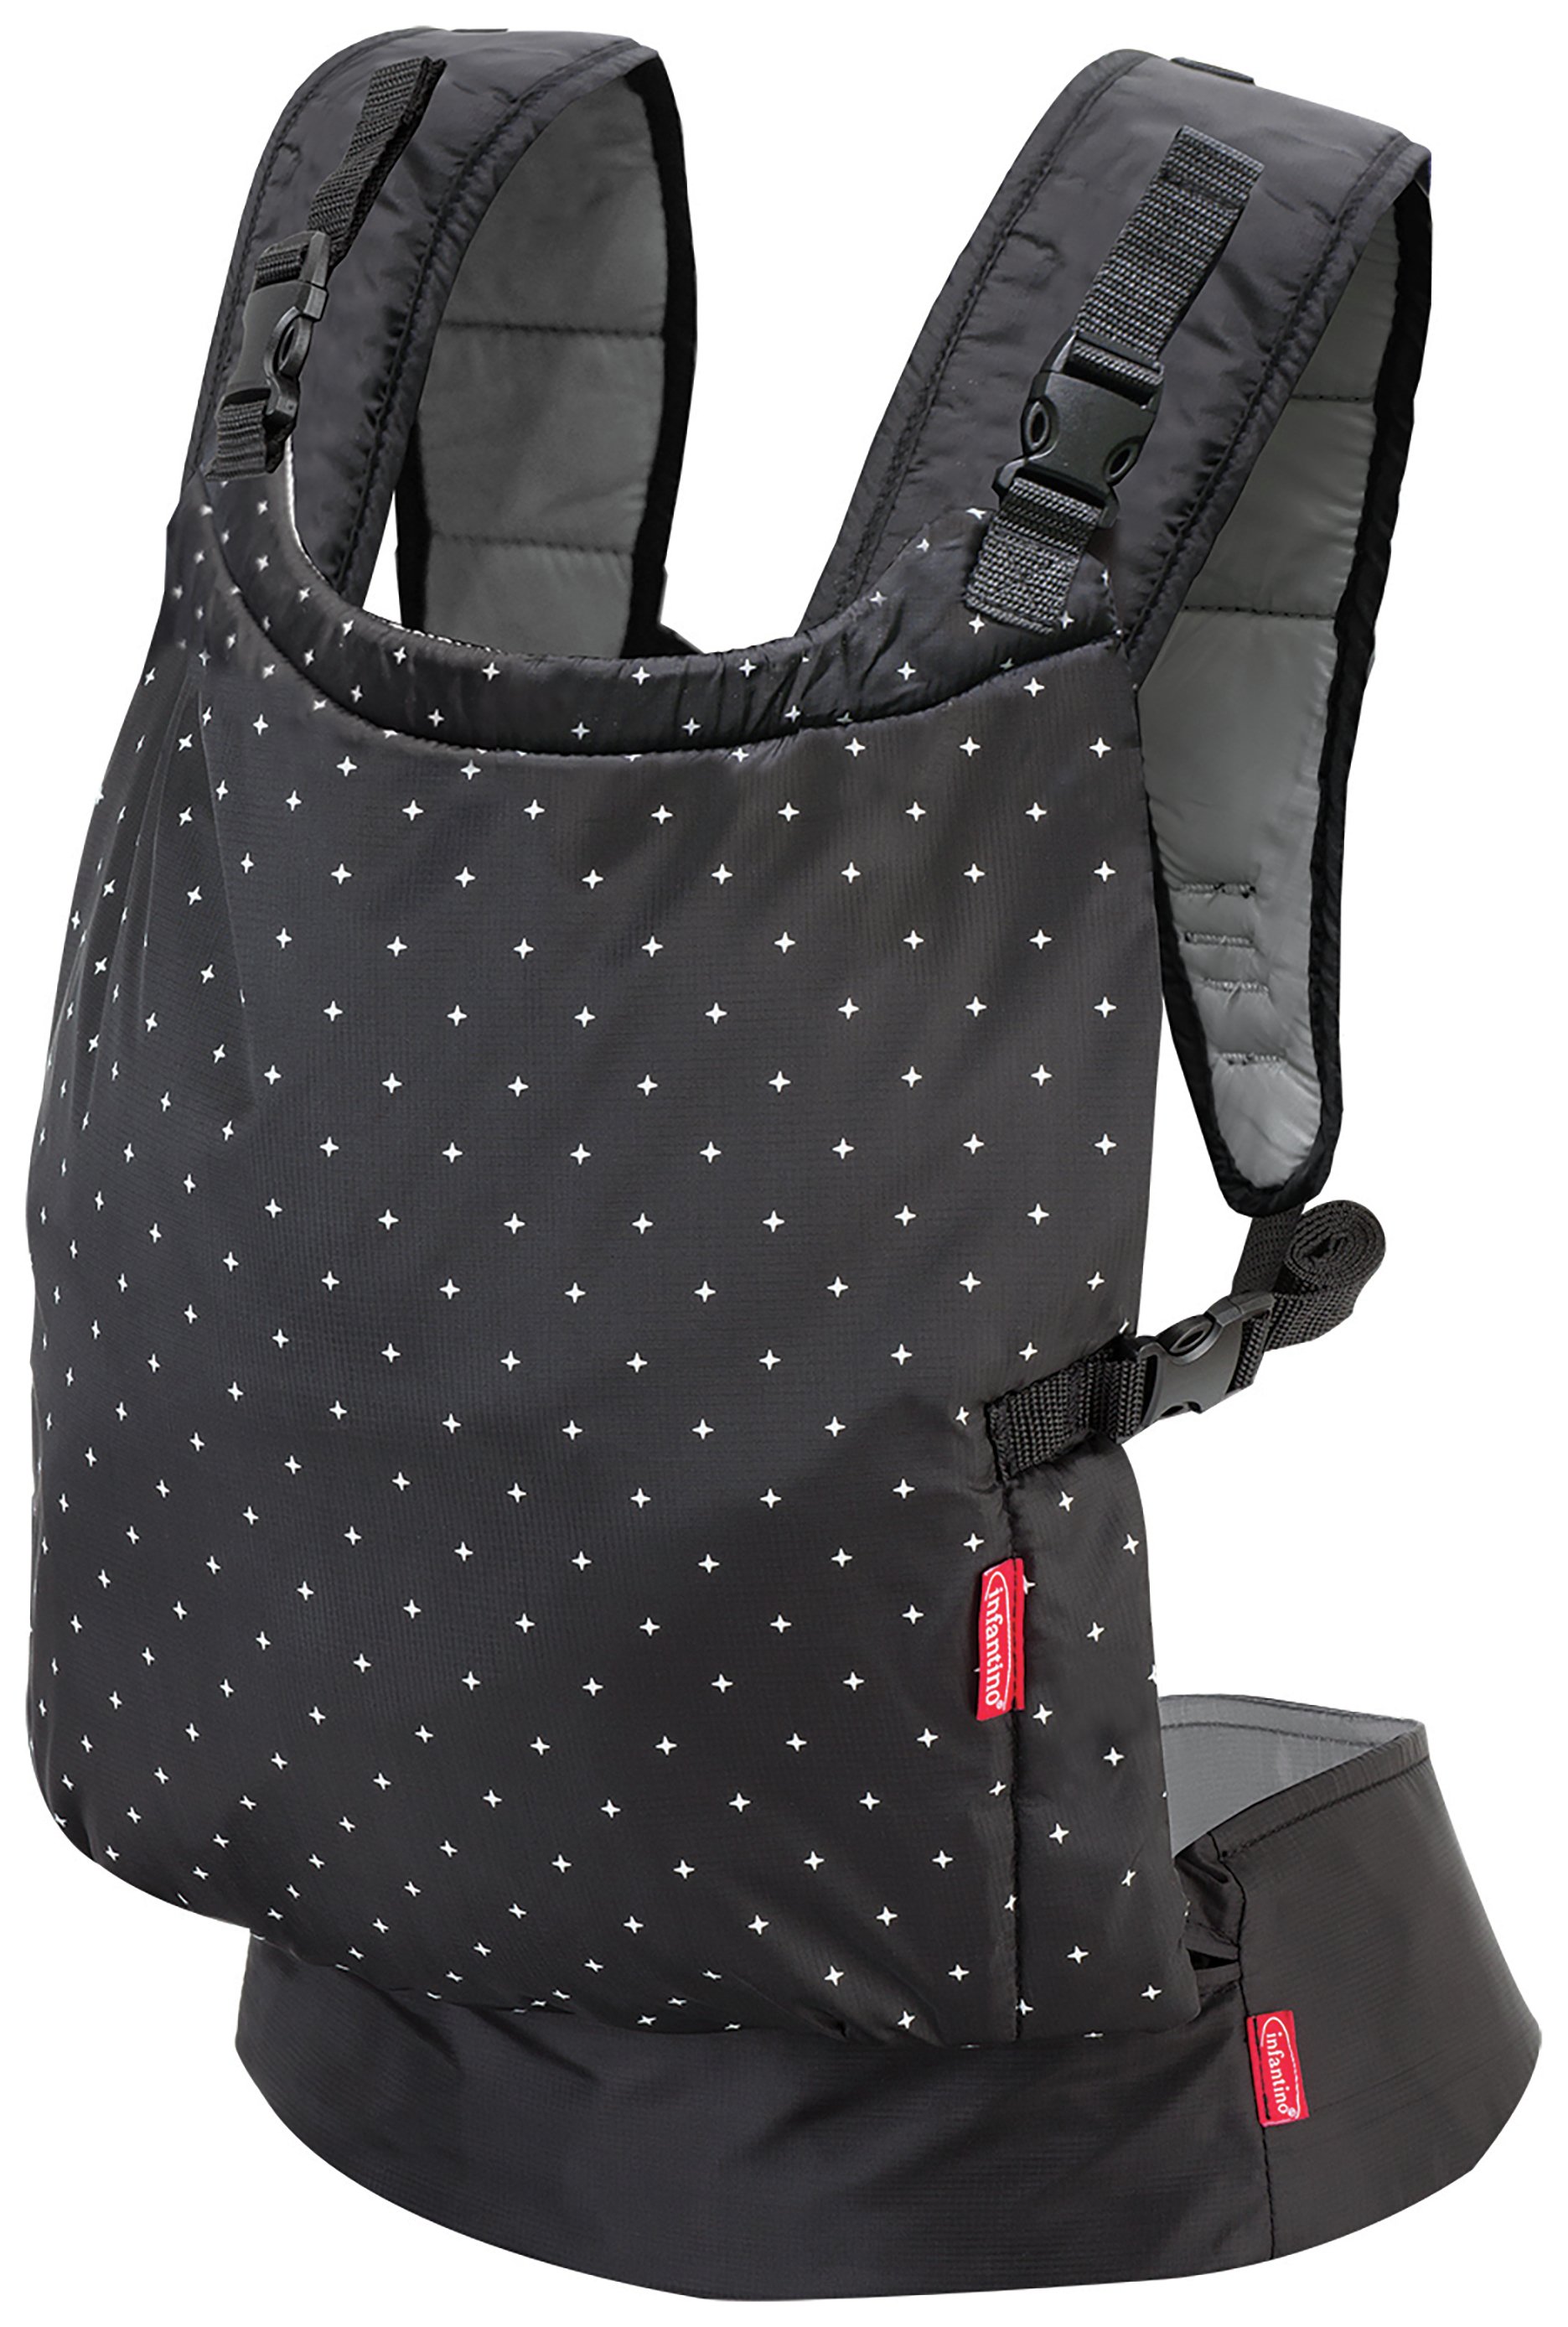 Infantino Zip Travel Carrier Review